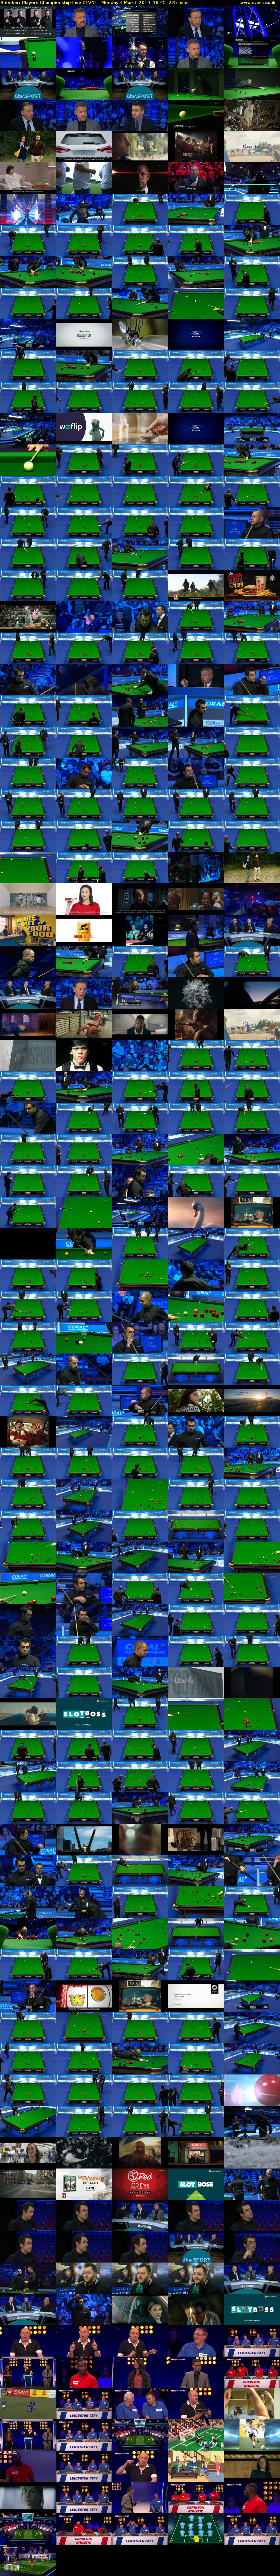 Snooker: Players Championship Live (ITV4) Monday 4 March 2019 18:45 - 22:30